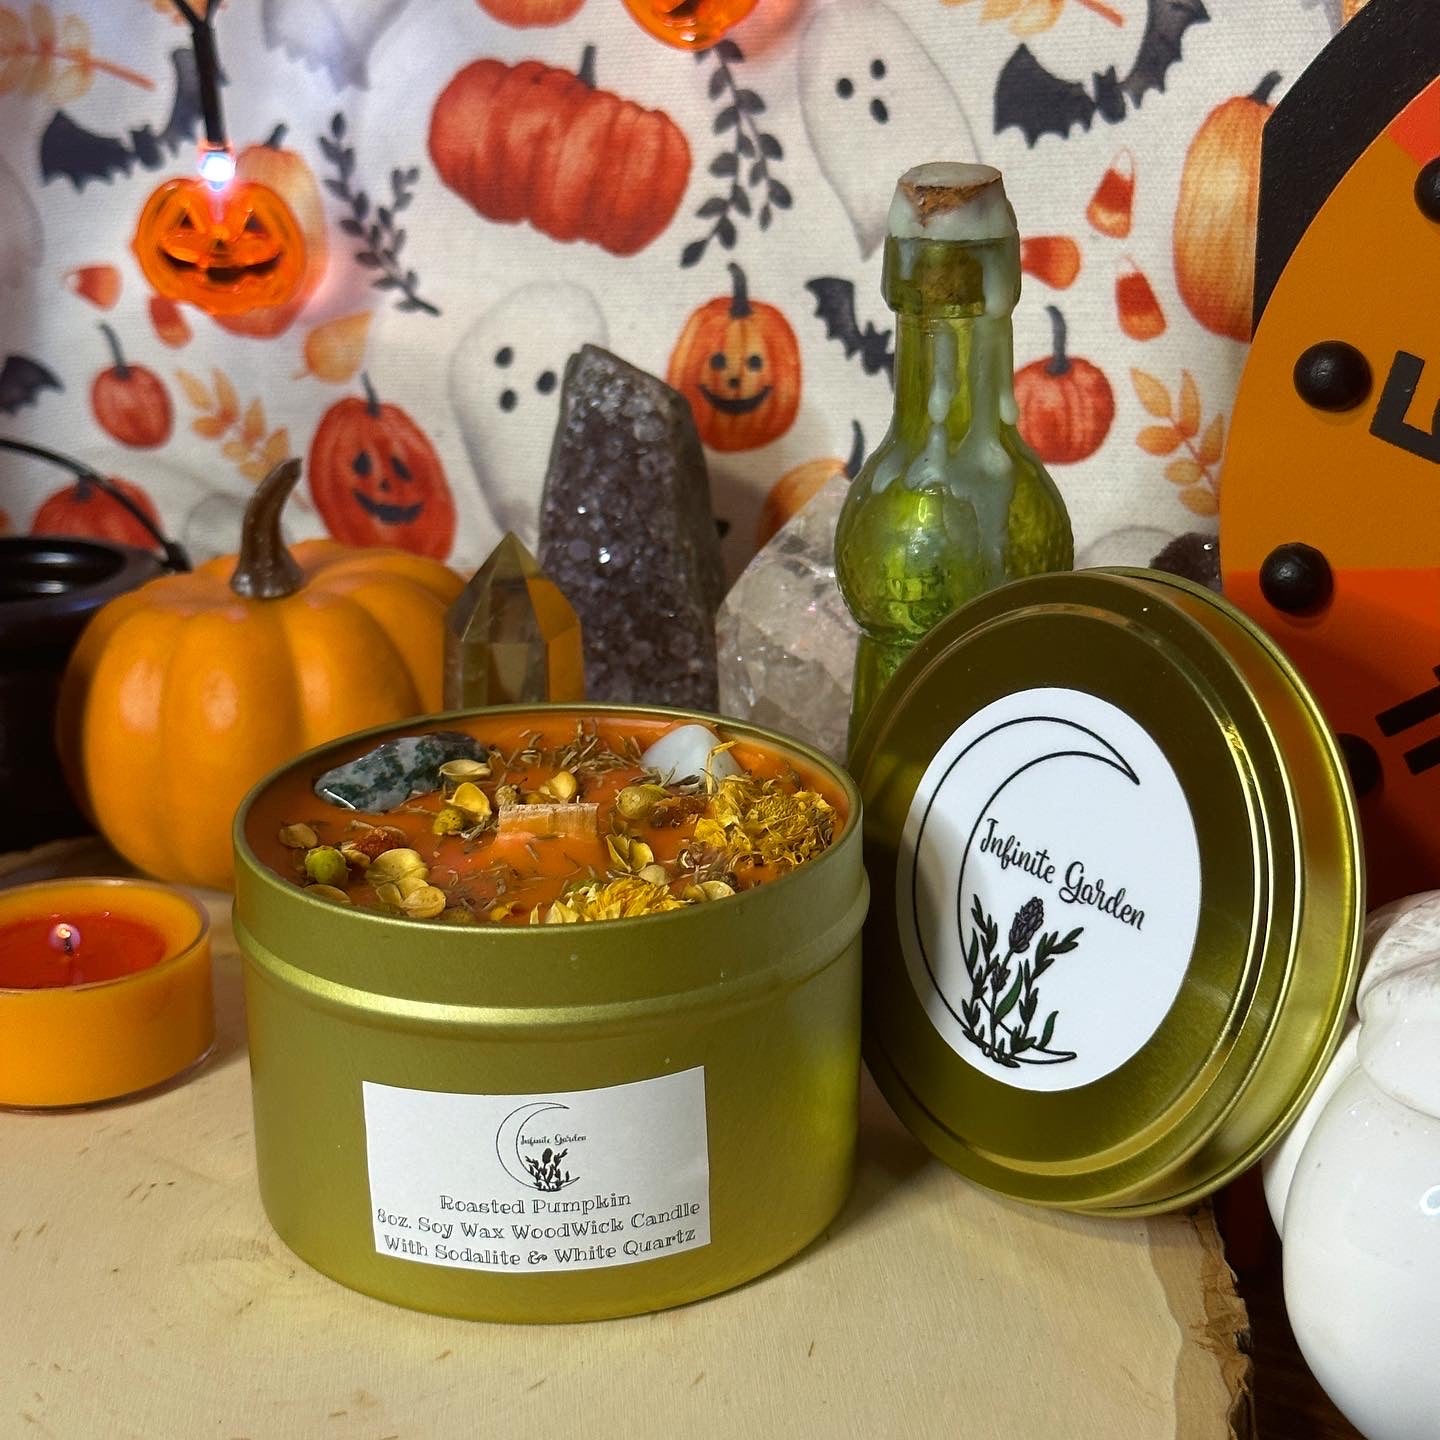 Roasted Pumpkin 8oz. Soy WoodWick Candle With Sodalite & White Quartz